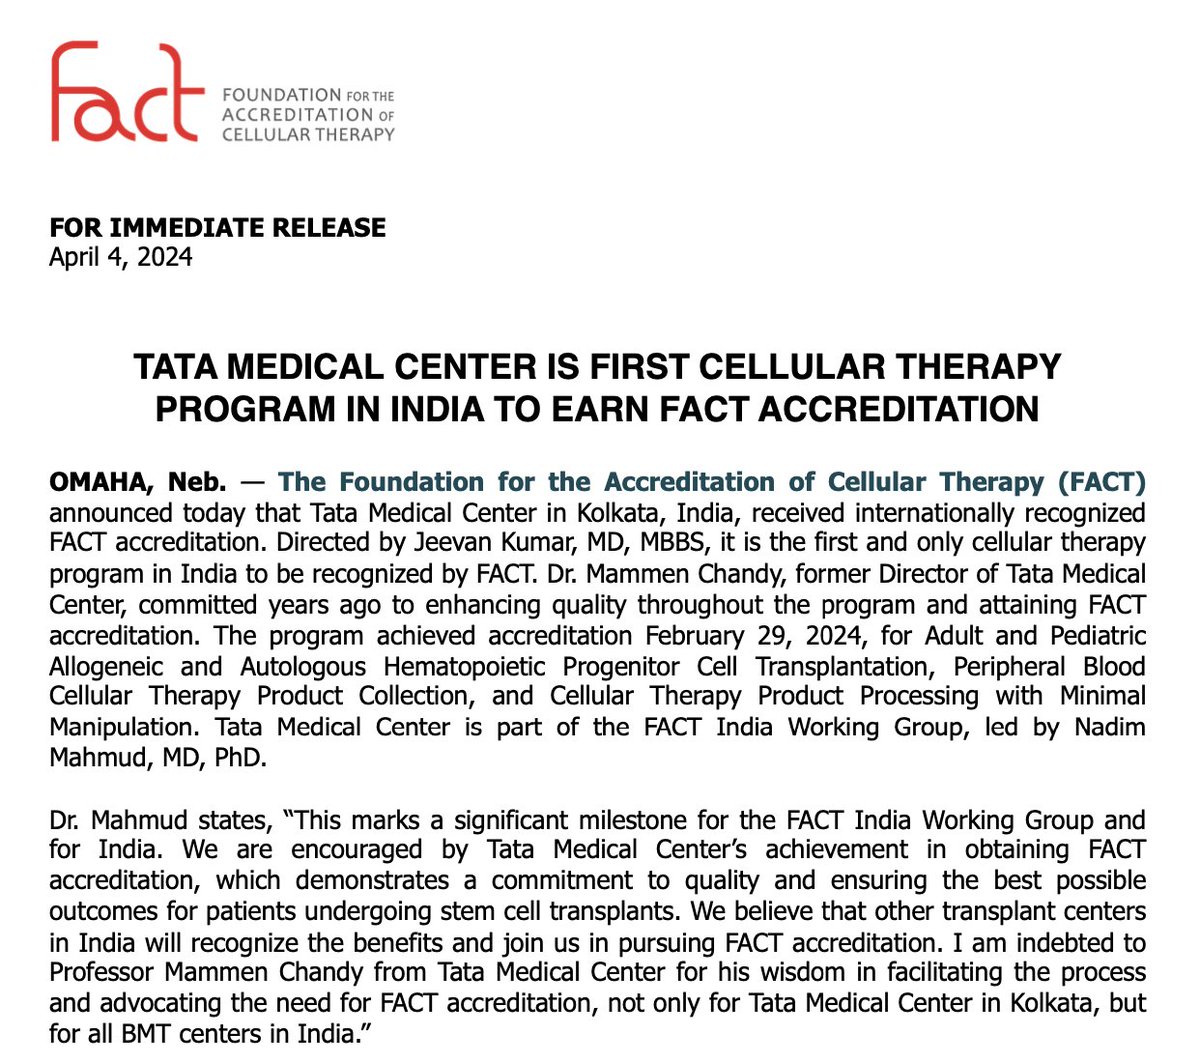 Another feather in the cap for the Tata Medical Center, HSCT and cell therapy community in India @FACTcelltherapy @TataMemorial @Satyayadav__ @nihardesai7 @nr_pedhemonc @RahulDoc2 @DrGKharya @DrManasKalra1 @BldCancerDoc @Nadim_M_Chicago @purwarrahul2 @DrGauravNarula